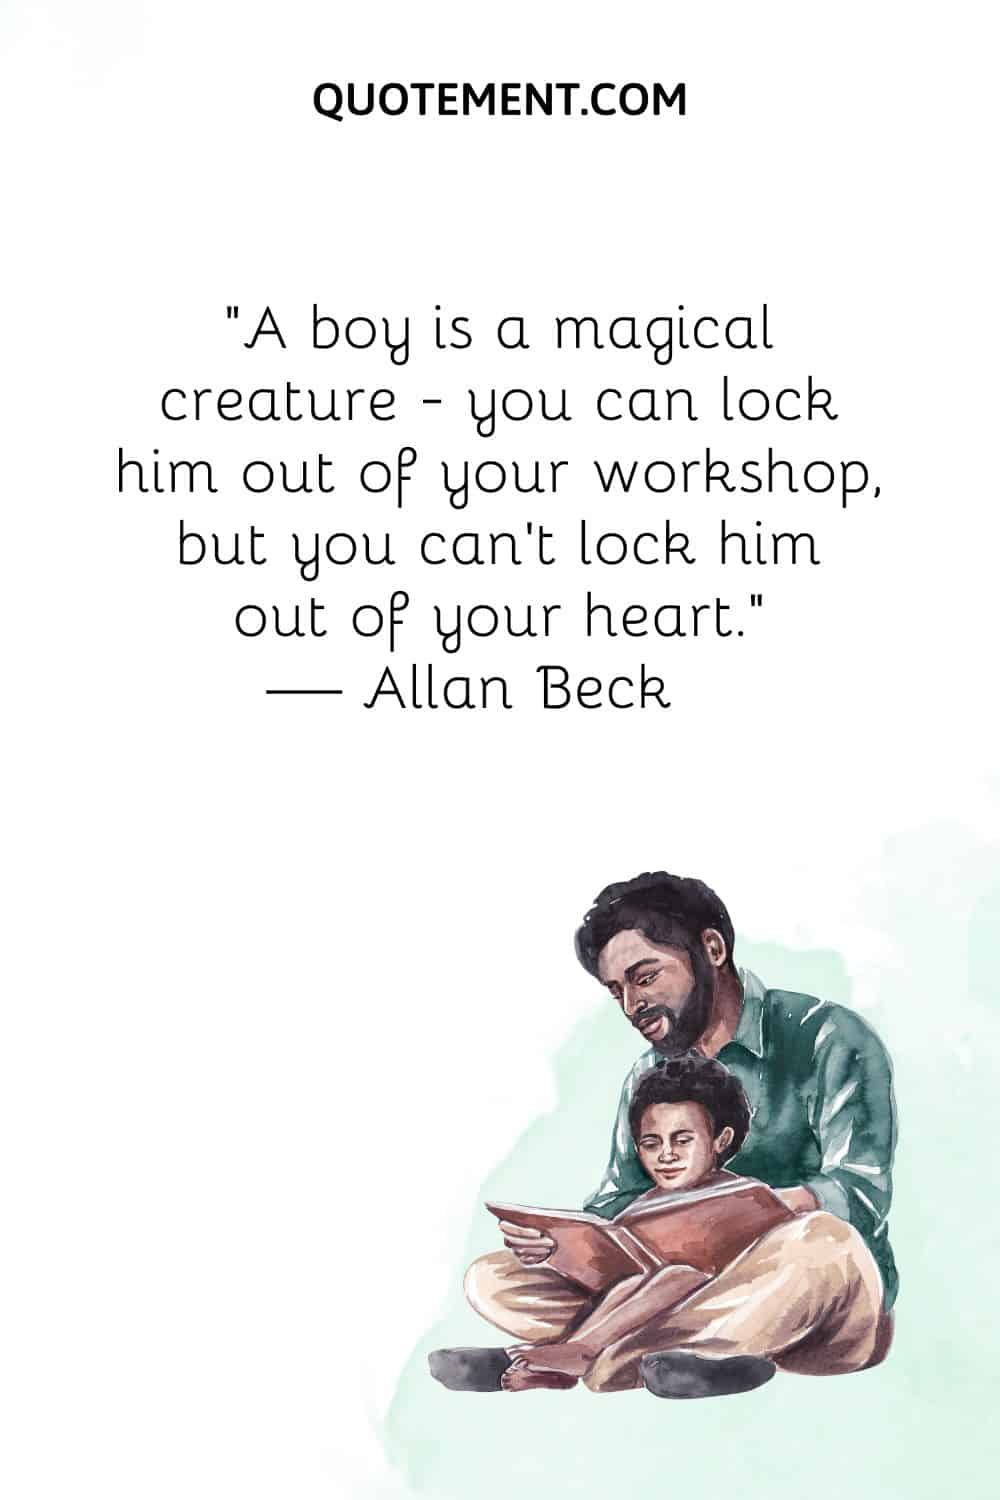 A boy is a magical creature — you can lock him out of your workshop, but you can't lock him out of your heart